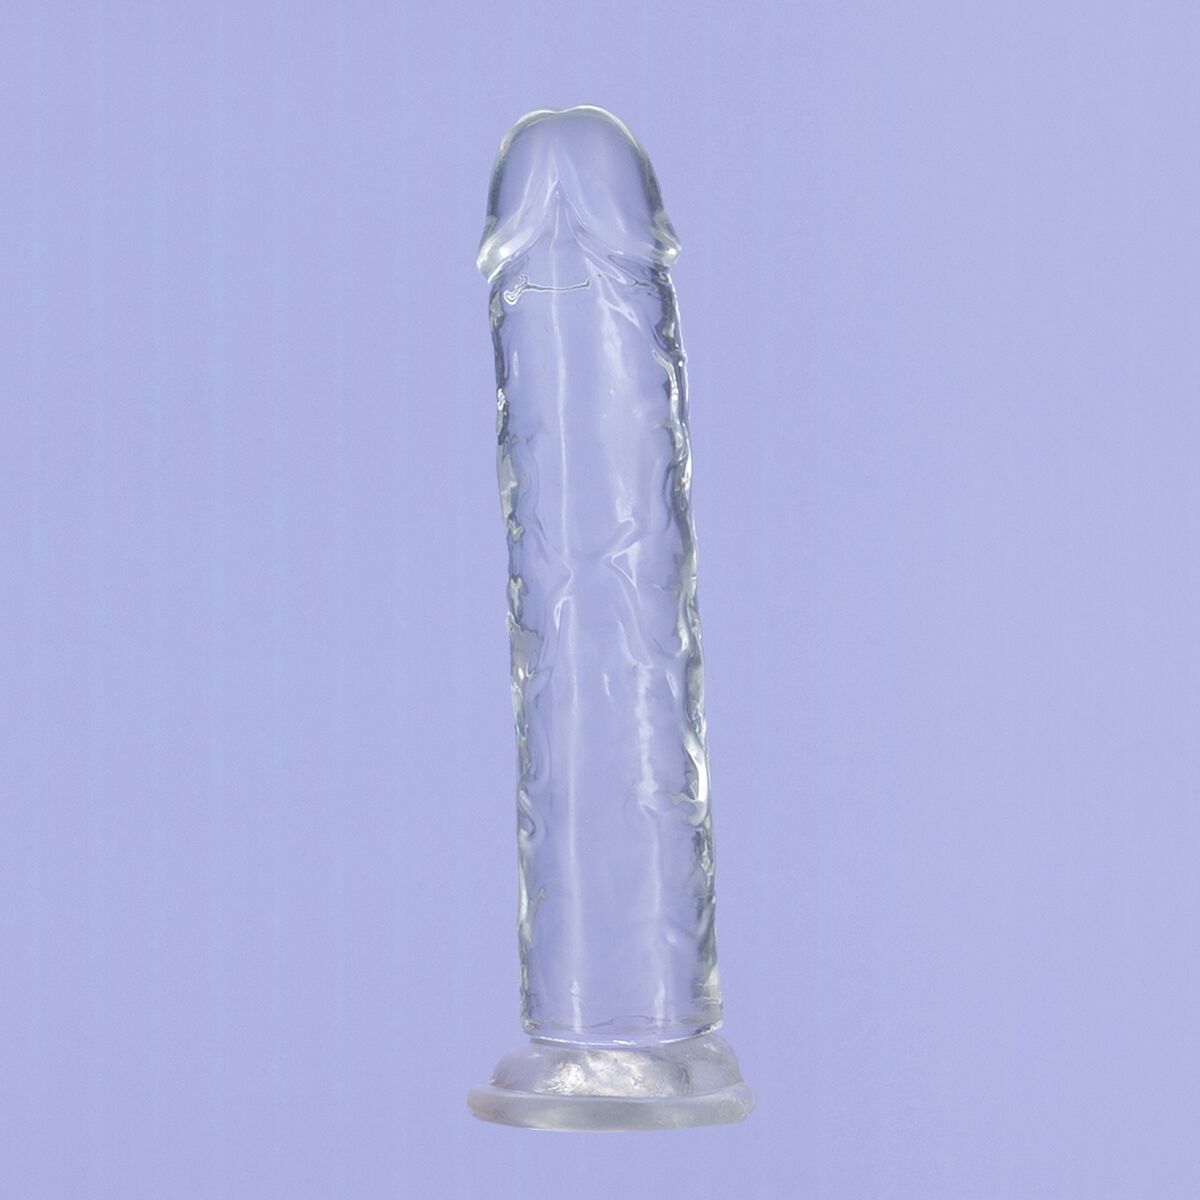  ADDICTION — Crystal Vertical Dong 7